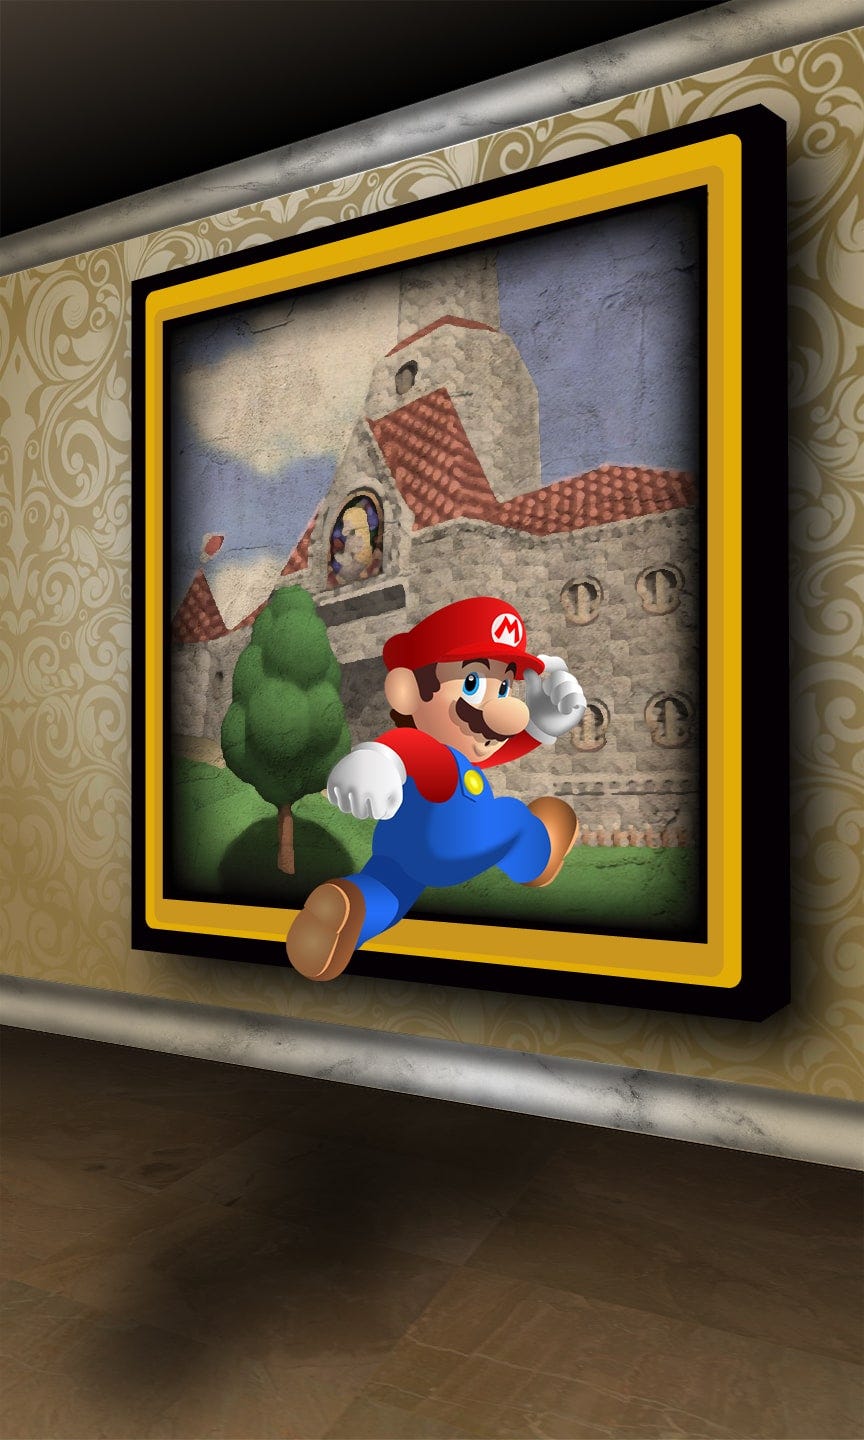 Super Mario jumping into a painting